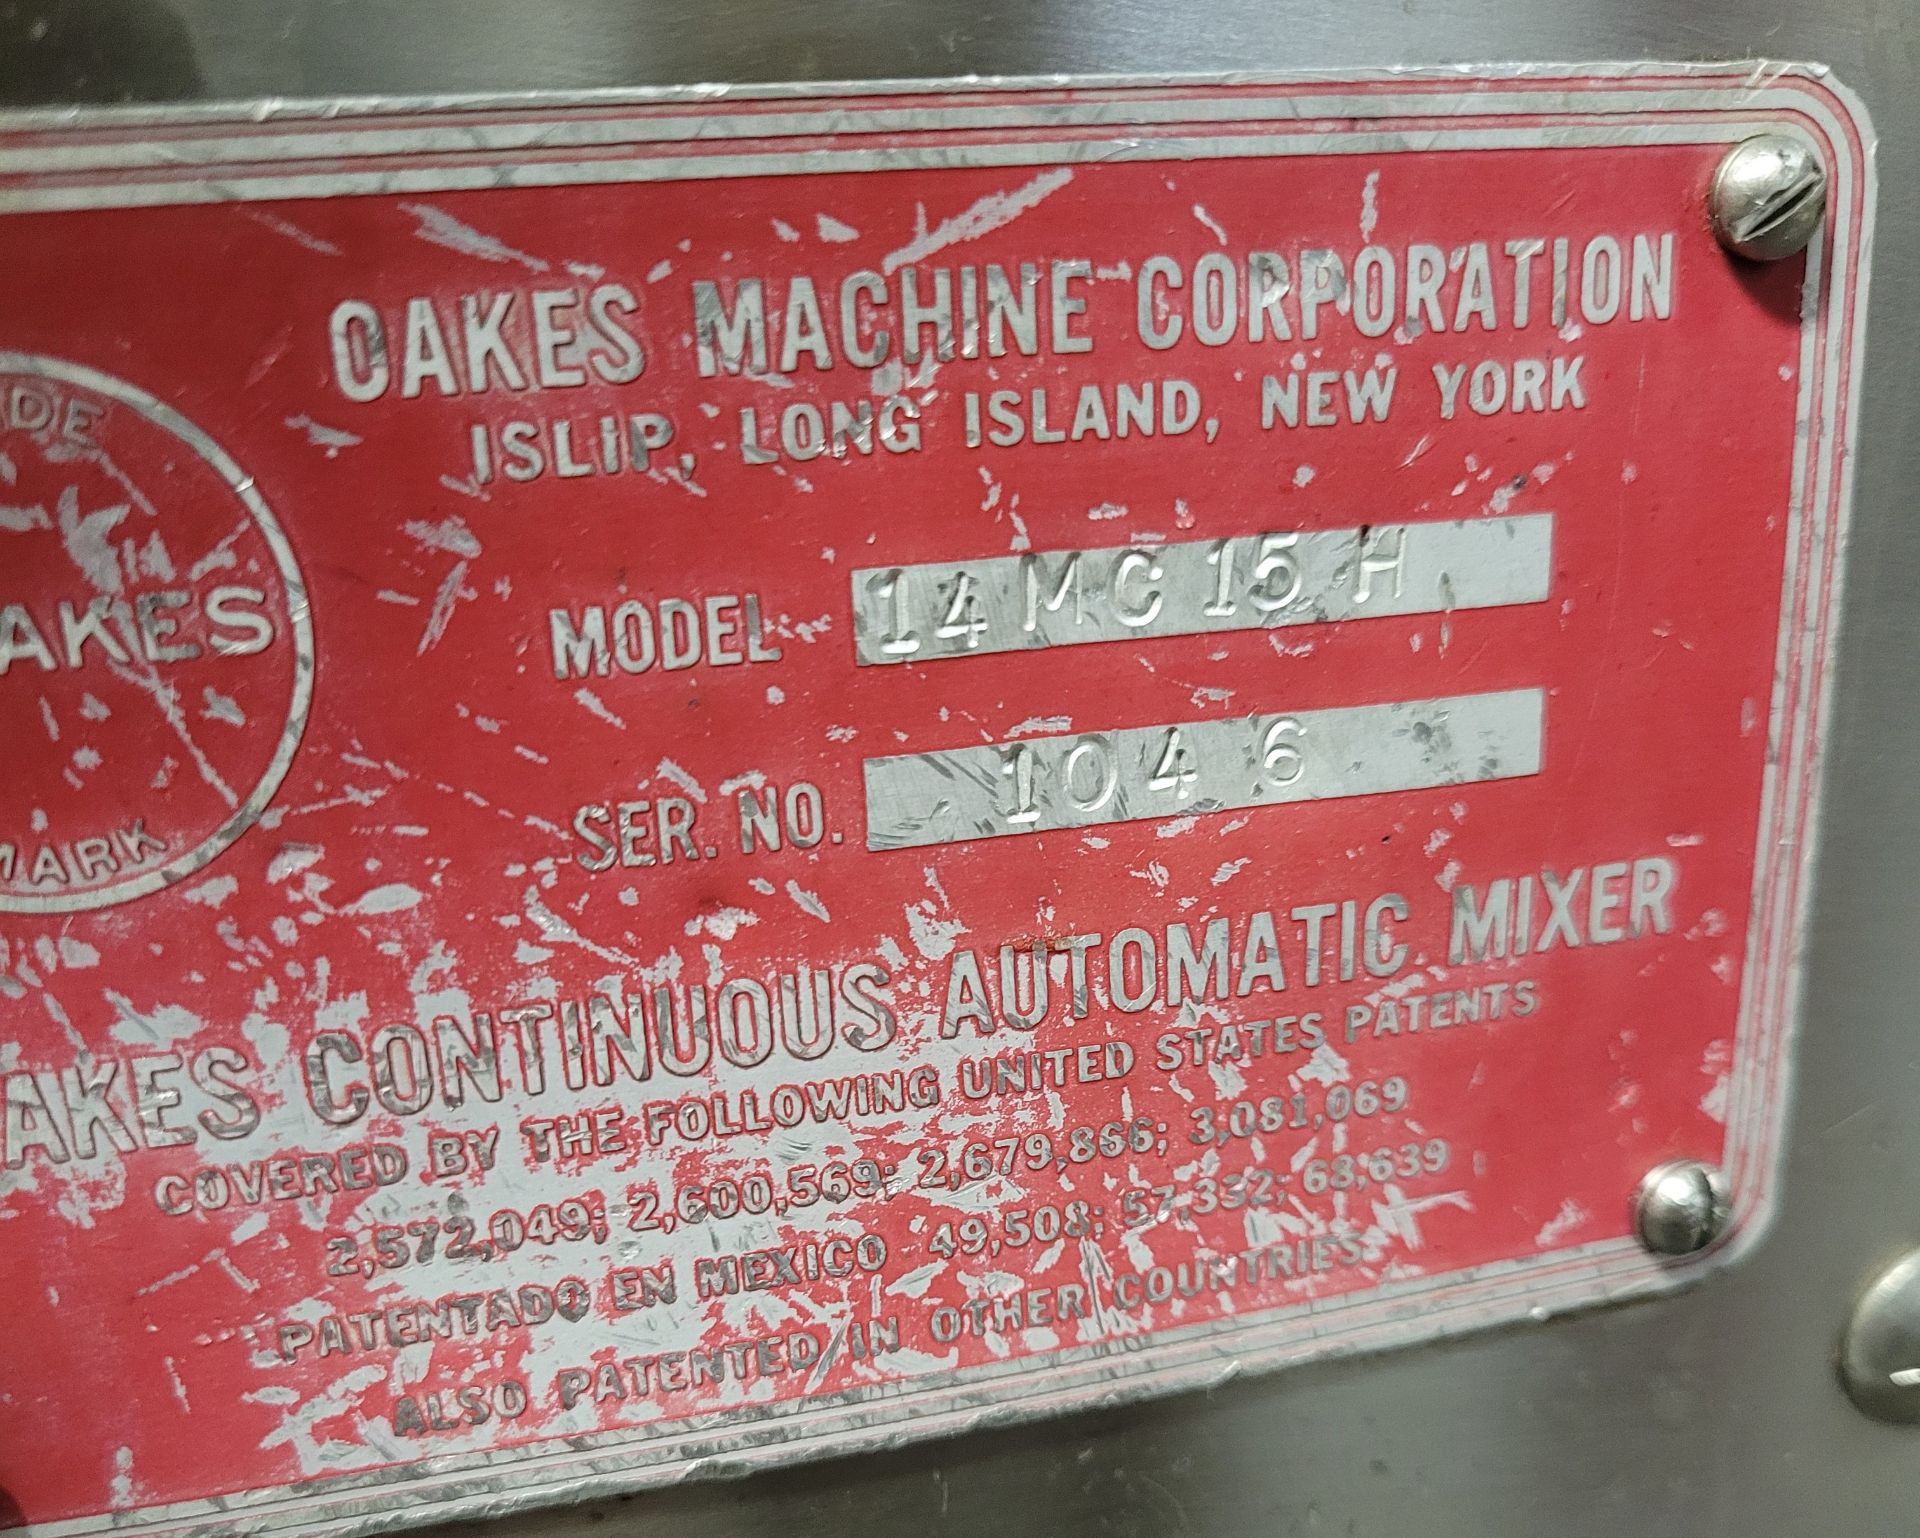 OAKES Machine Corp. Continuous Mixer, mod. 14MC15H, ser. 1045, with Bottom Mounted Positive - Image 3 of 7